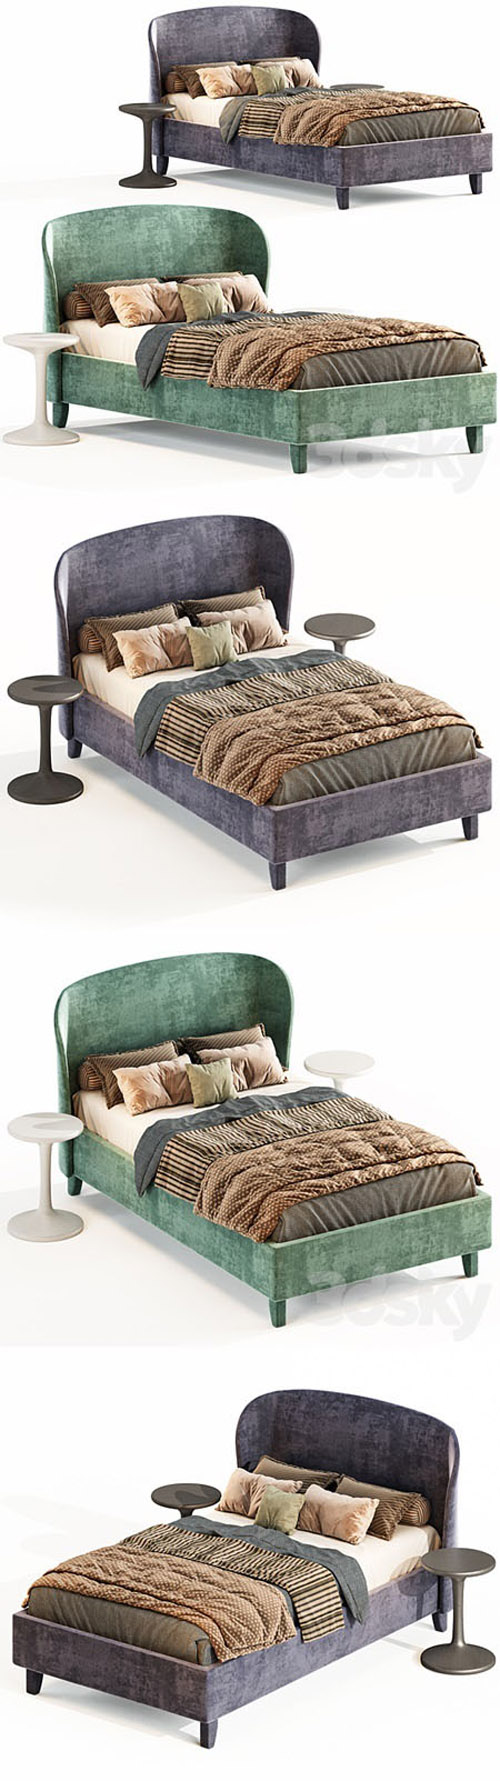 SINGLE BED CARNABY 3D Models